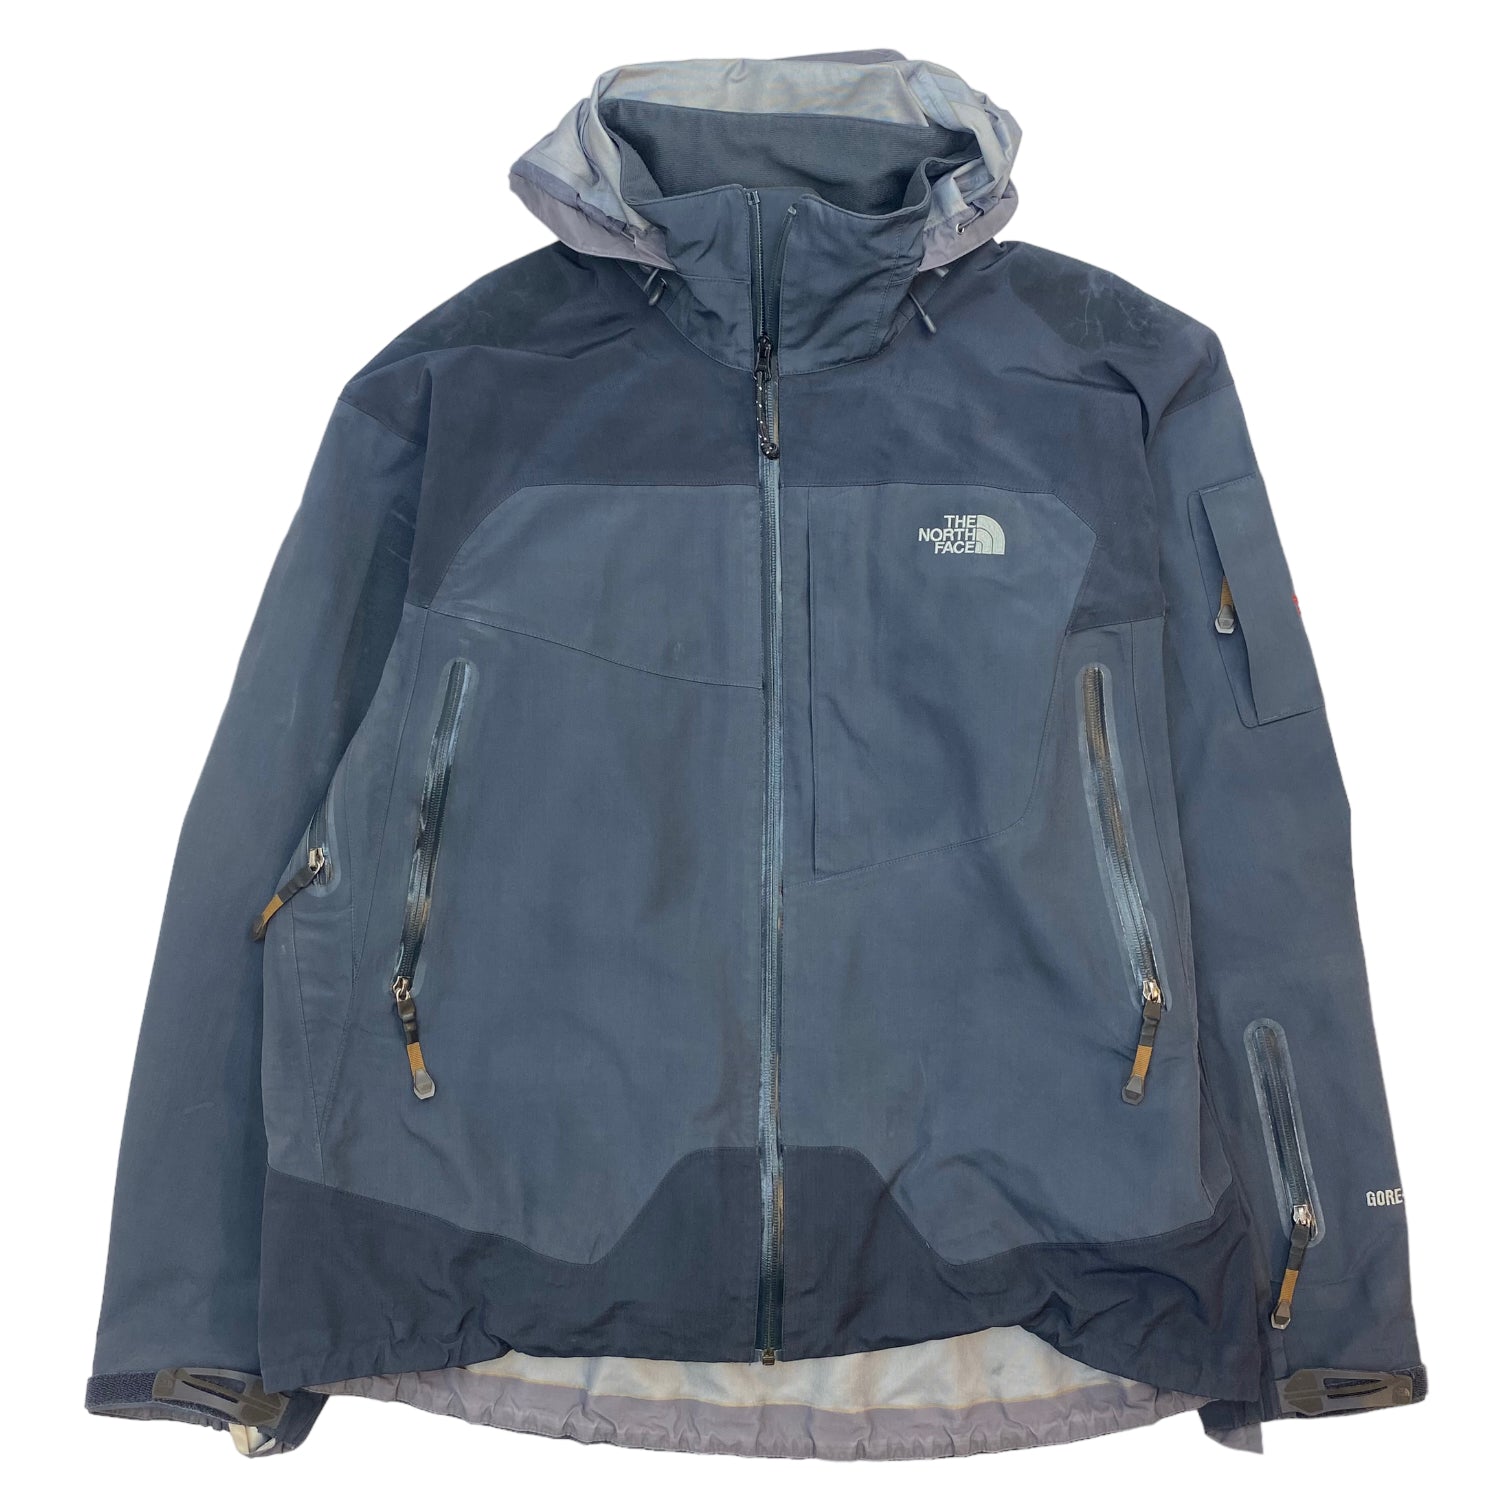 Vintage The North Face Summit Series Gore-Tex XCR Jacket